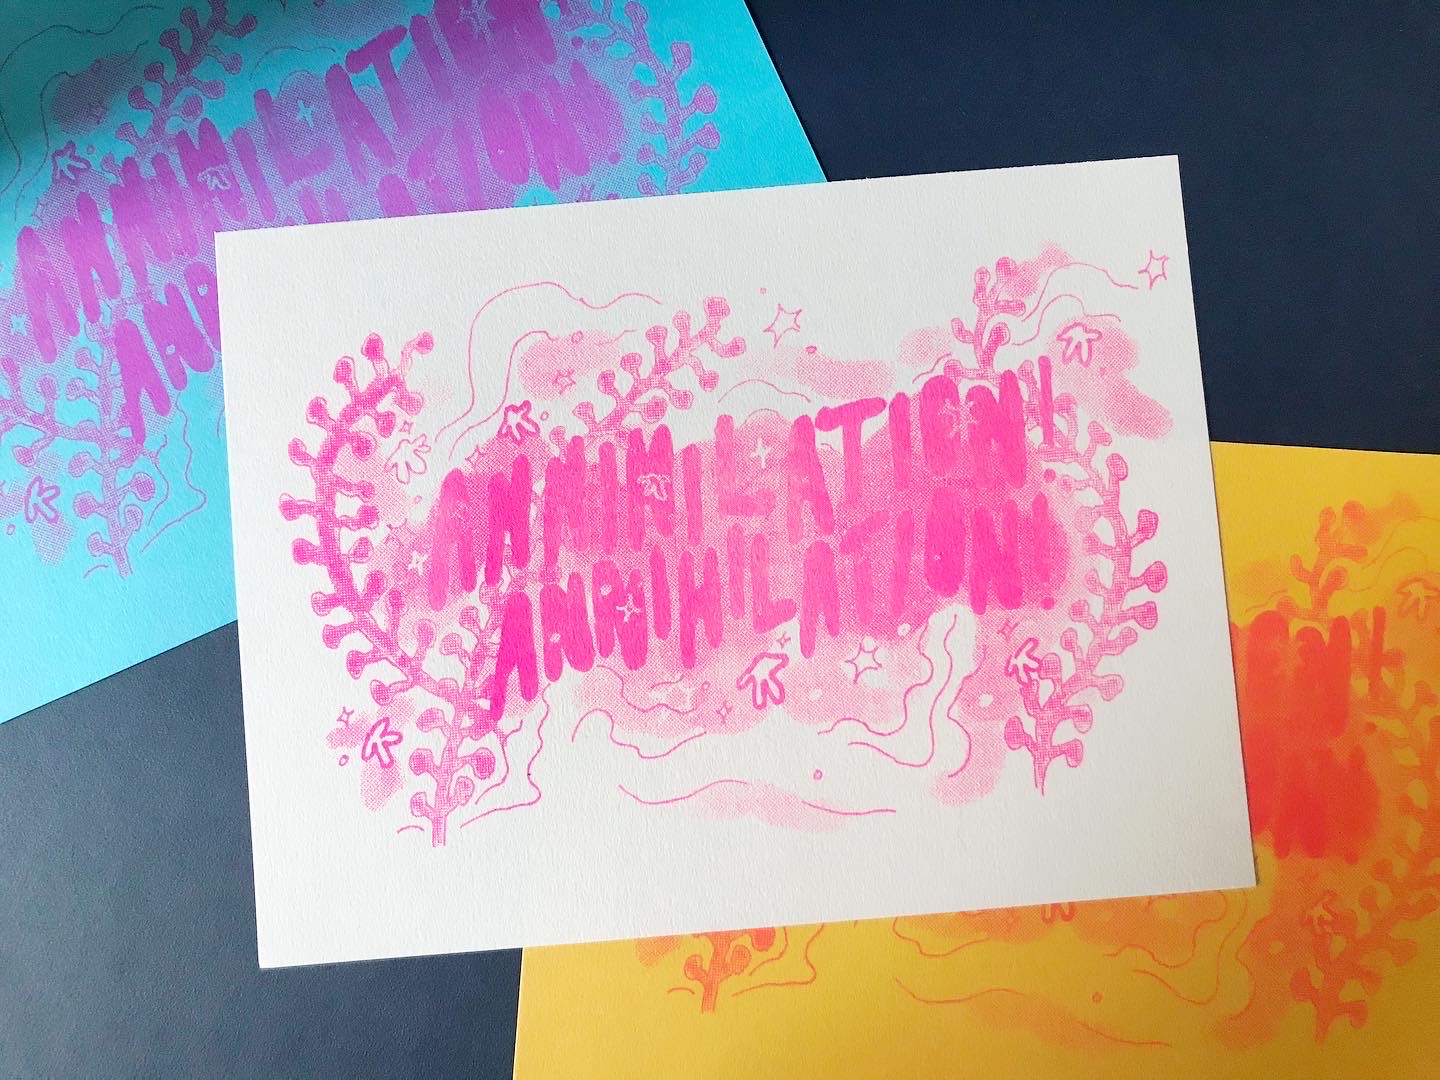 Three risograph prints of the same design, the words 'ANNIHILATION! ANNIHILATION! surrounded by plants, clouds, stars and spores, all coloured in halftone. The designs have been printed in pink on white, red on orange and purle on blue.